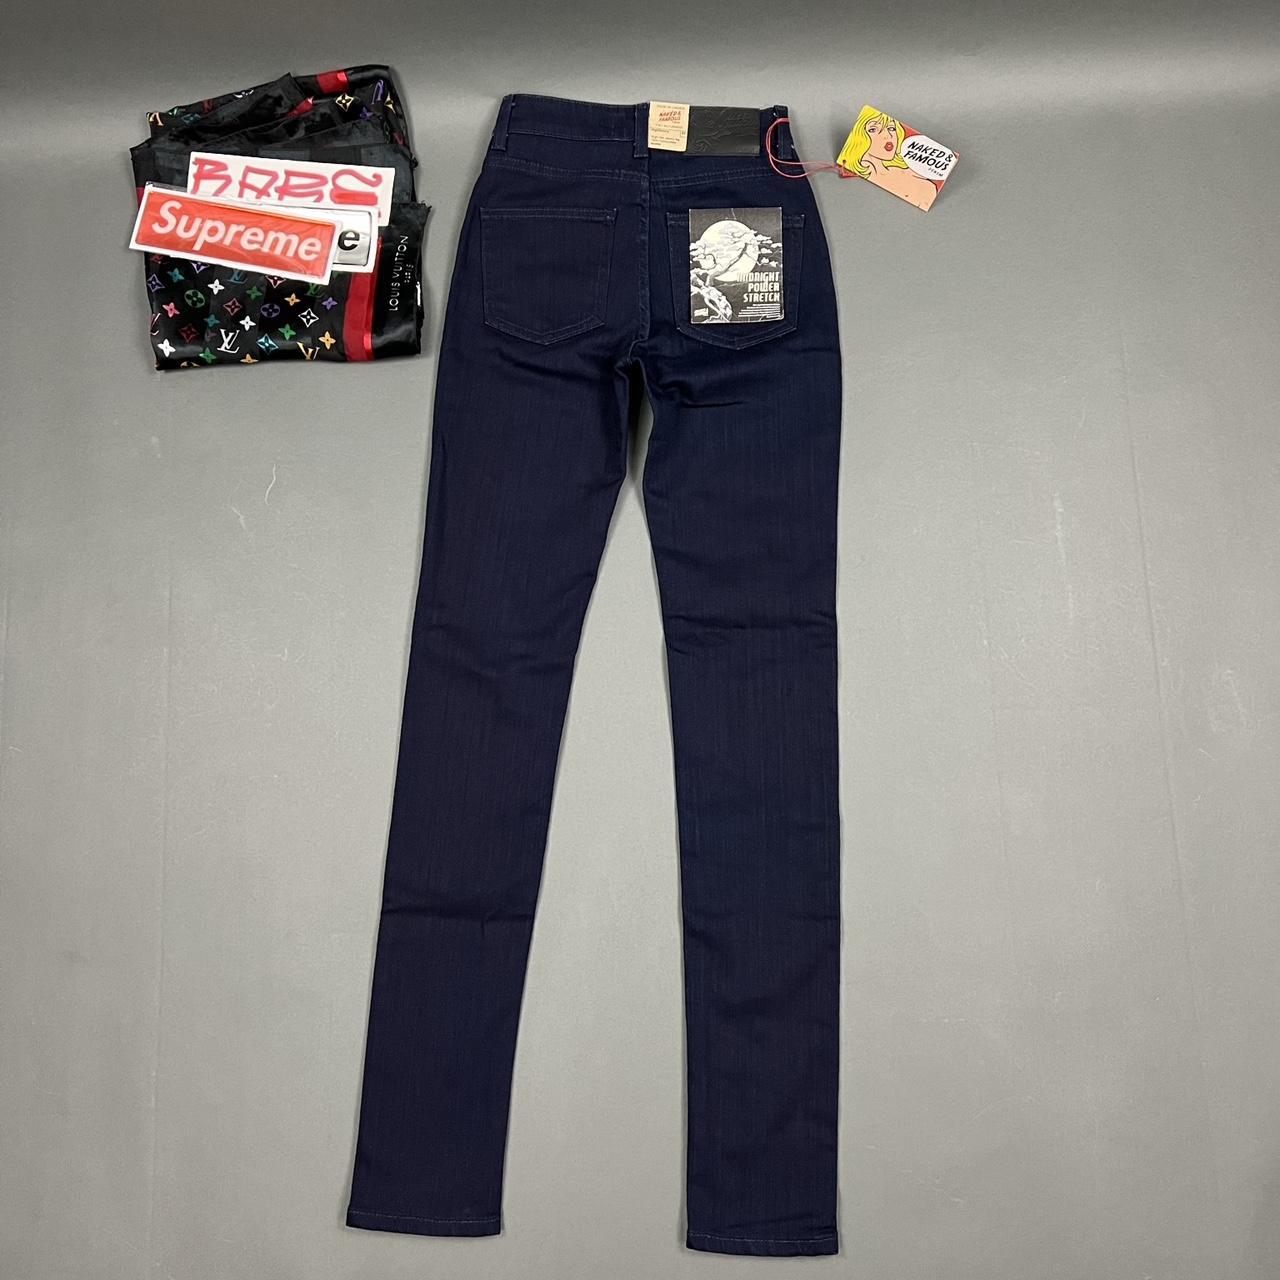 Naked & Famous Denim Women's Navy and Blue Jeans | Depop